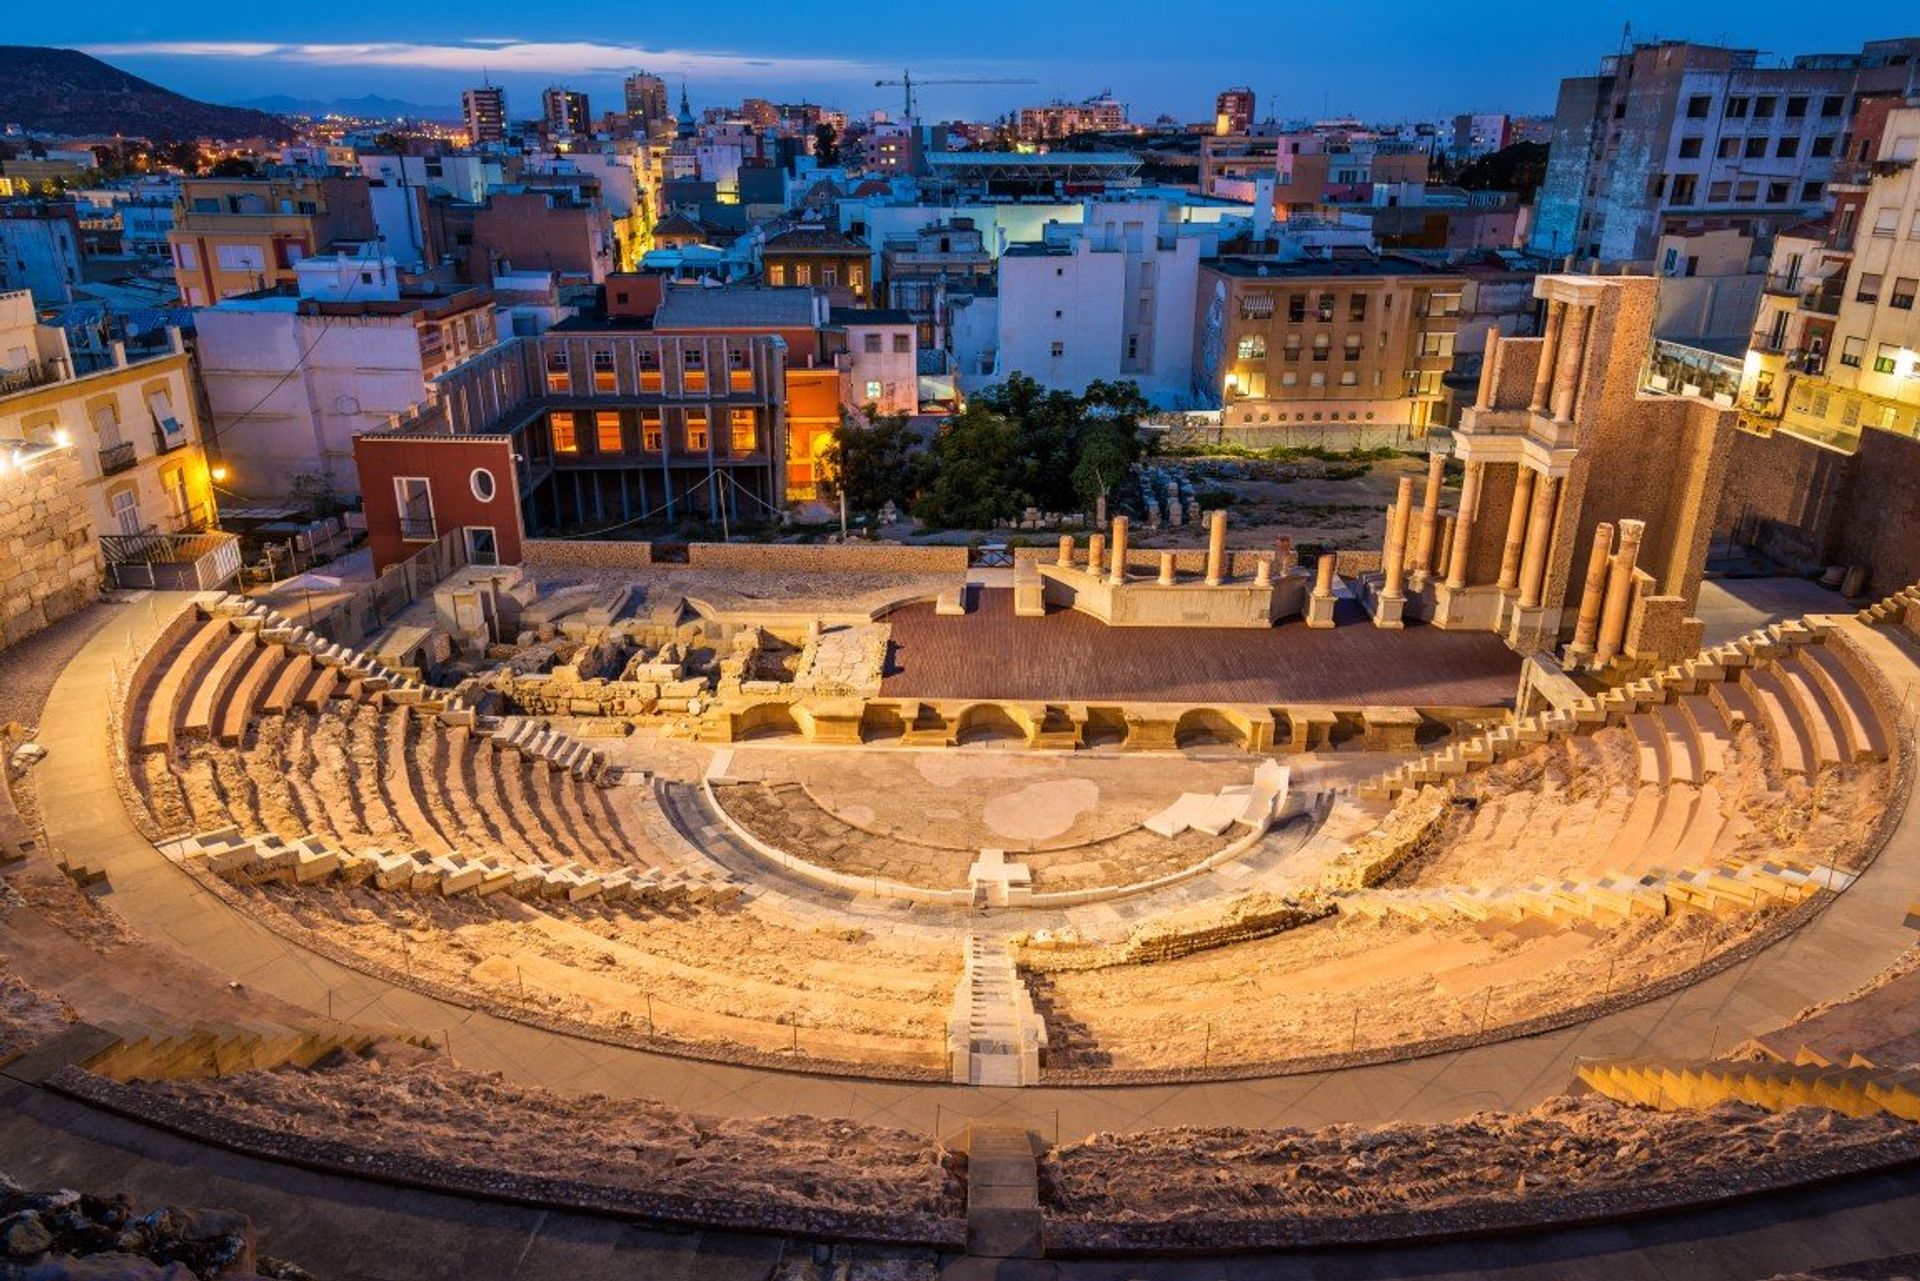 The impressive ancient Roman theatre in Cartagena was built over 2000 years ago